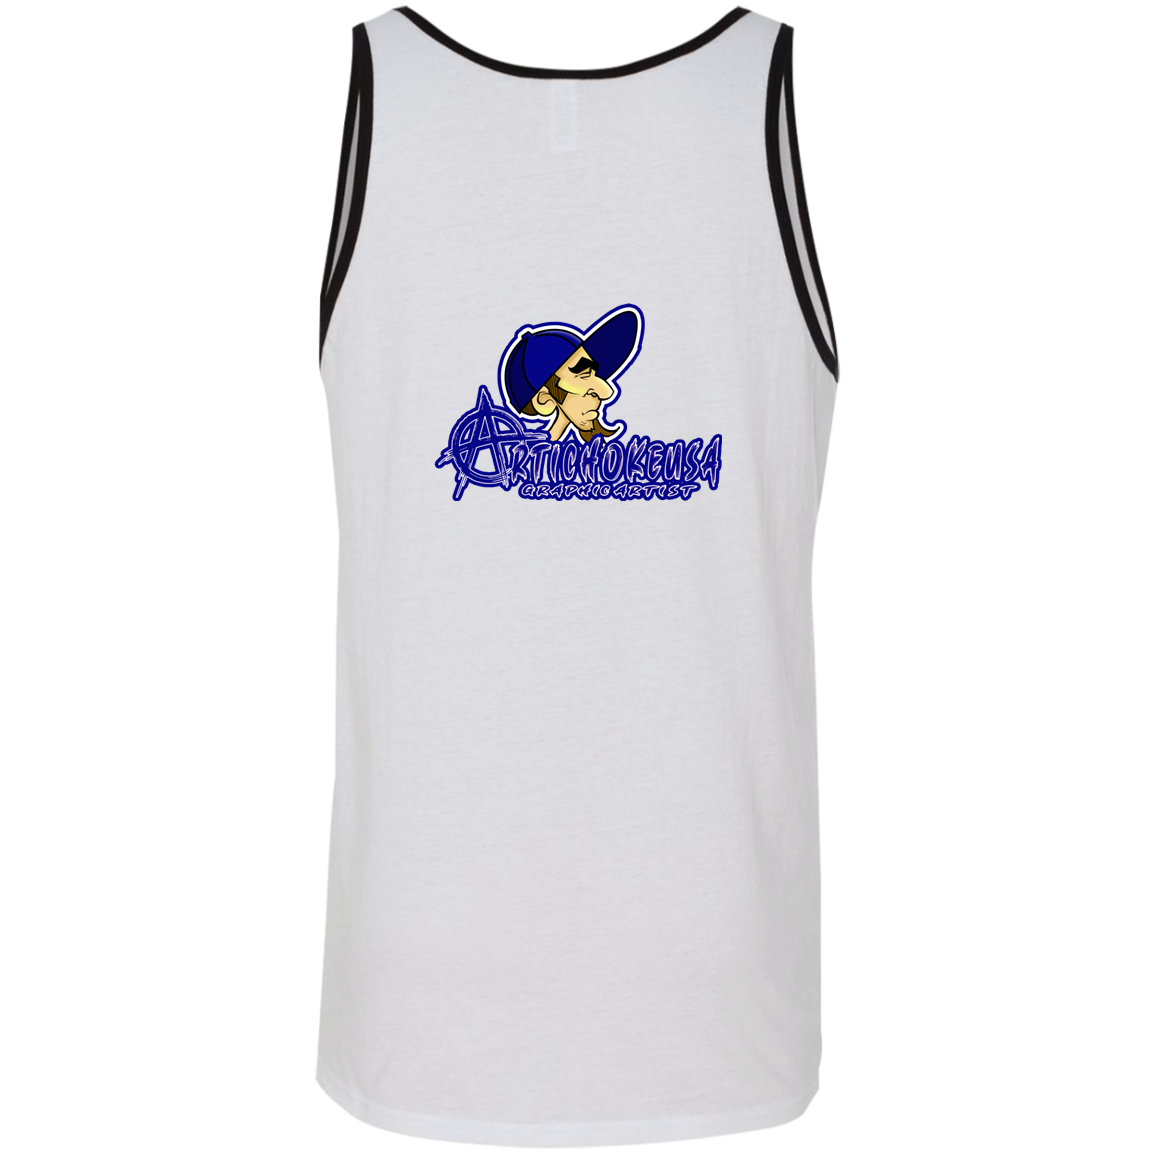 ZZ#20 ArtichokeUSA Characters and Fonts. "Clem" Let’s Create Your Own Design Today. Unisex Tank